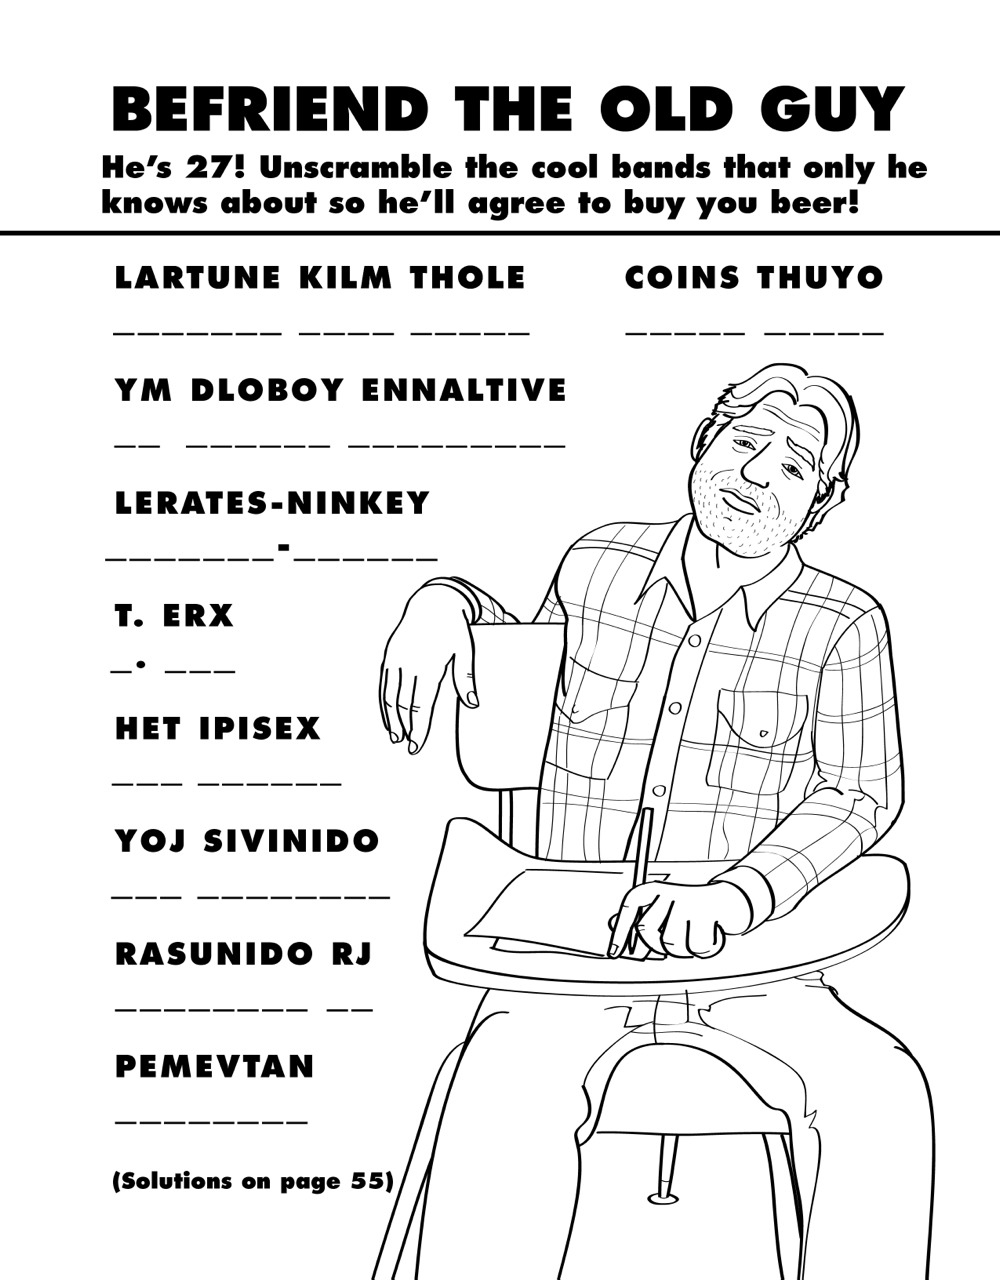 coloring for grown ups - Befriend The Old Guy He's 27! Unscramble the cool bands that only he knows about so he'll agree to buy you beer! Coins Thuyo Lartune Kilm Thole Ym Dloboy Ennaltive LeratesNinkey T. Erx _ Het Ipisex Yoj Sivinido Rasunido Rj Pemevta